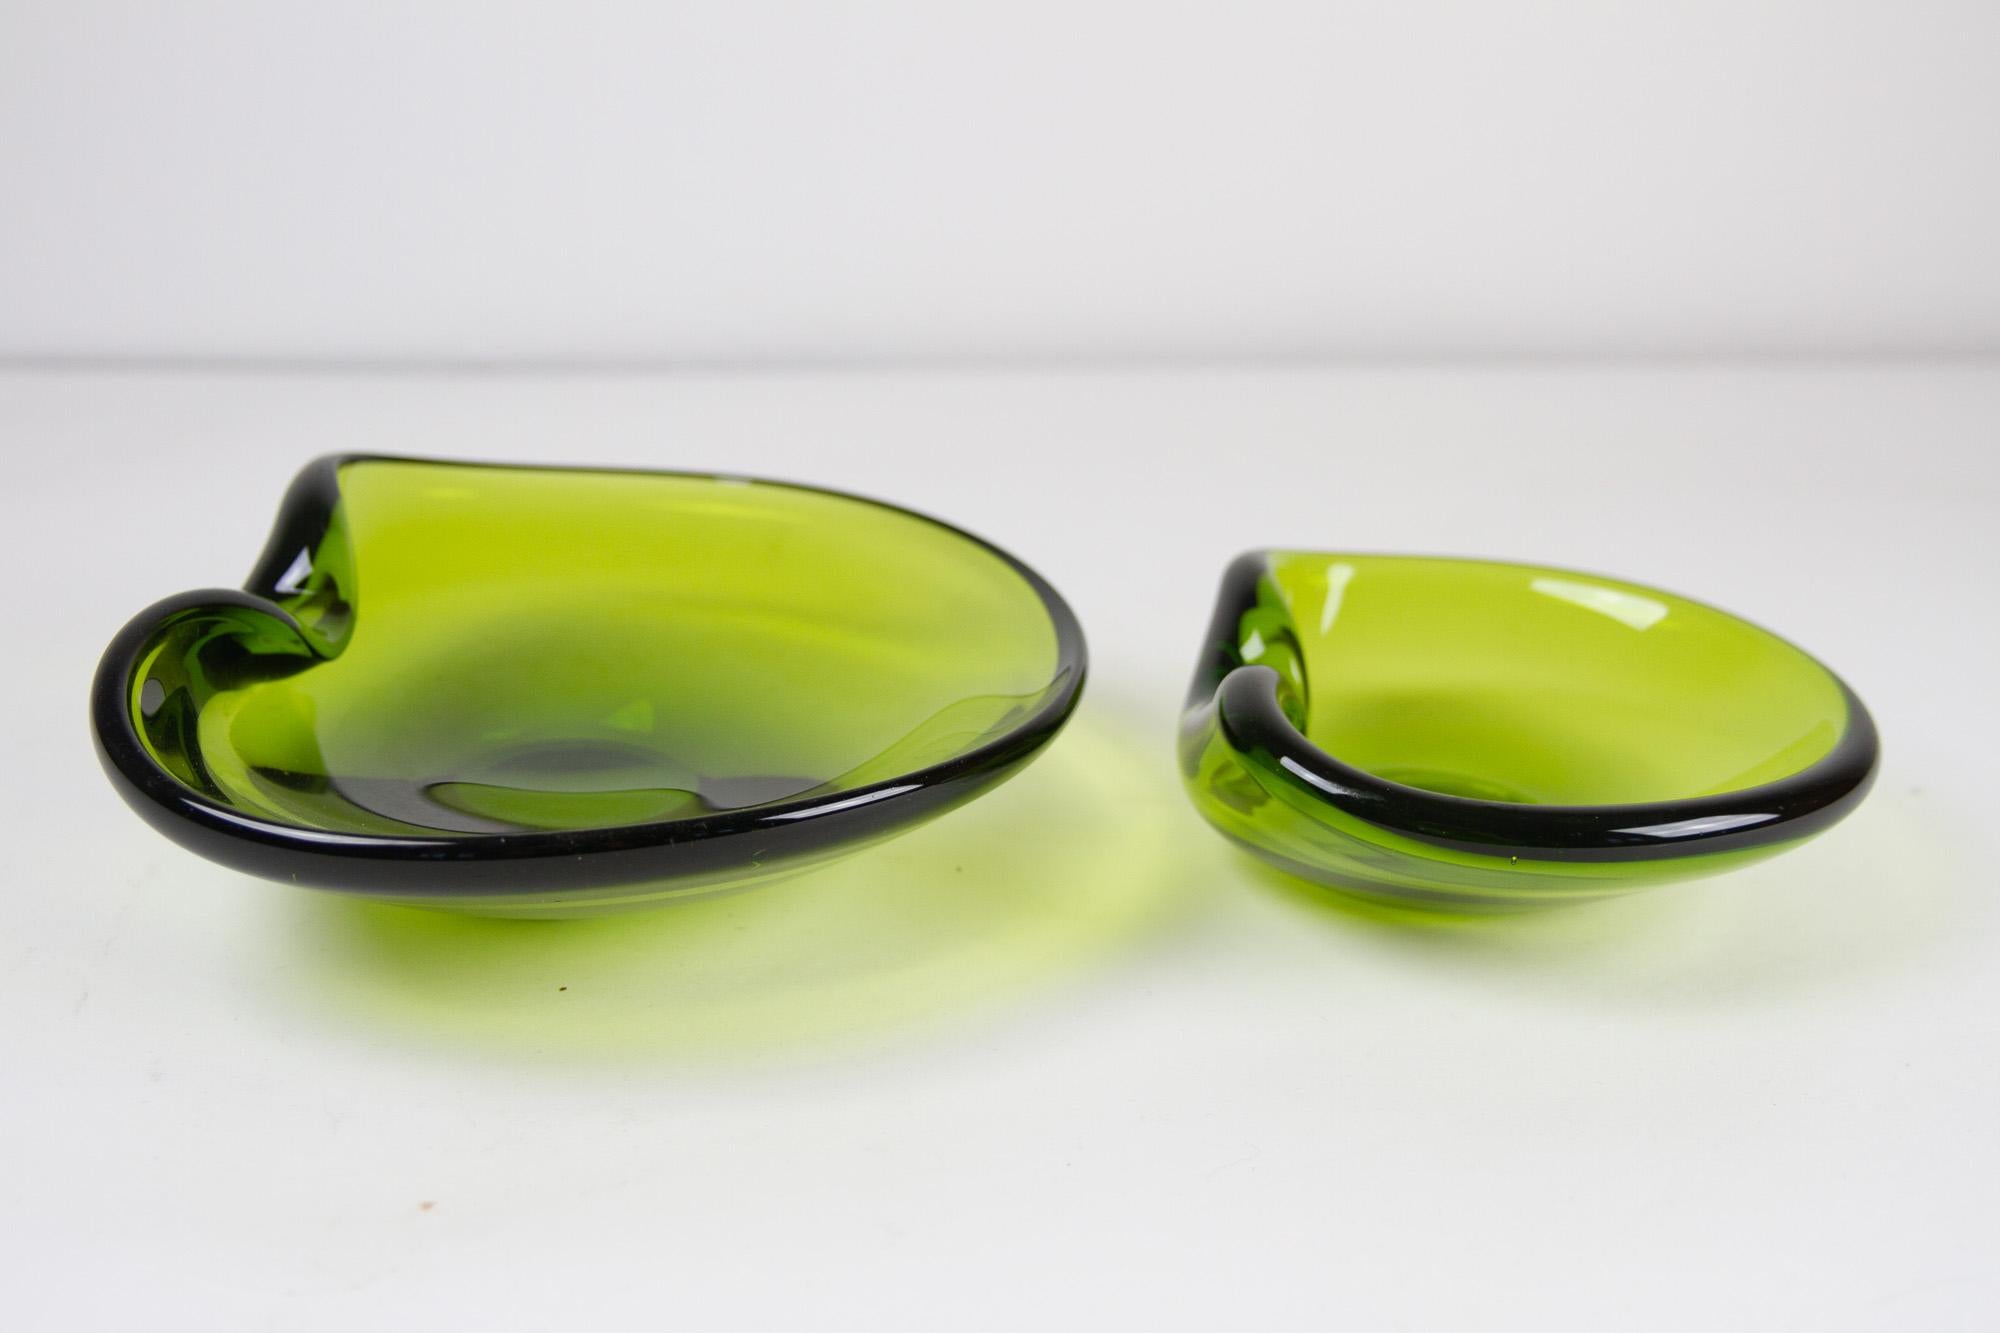 Vintage Danish pair of Maygreen glass bowls by Per Lütken. 1950s, Set of 2.
Stunning pair of organically shaped Danish modern glass bowls in heavy green glass from the May green series designed by Per Lütken for Holmegaard Glassworks, Denmark in